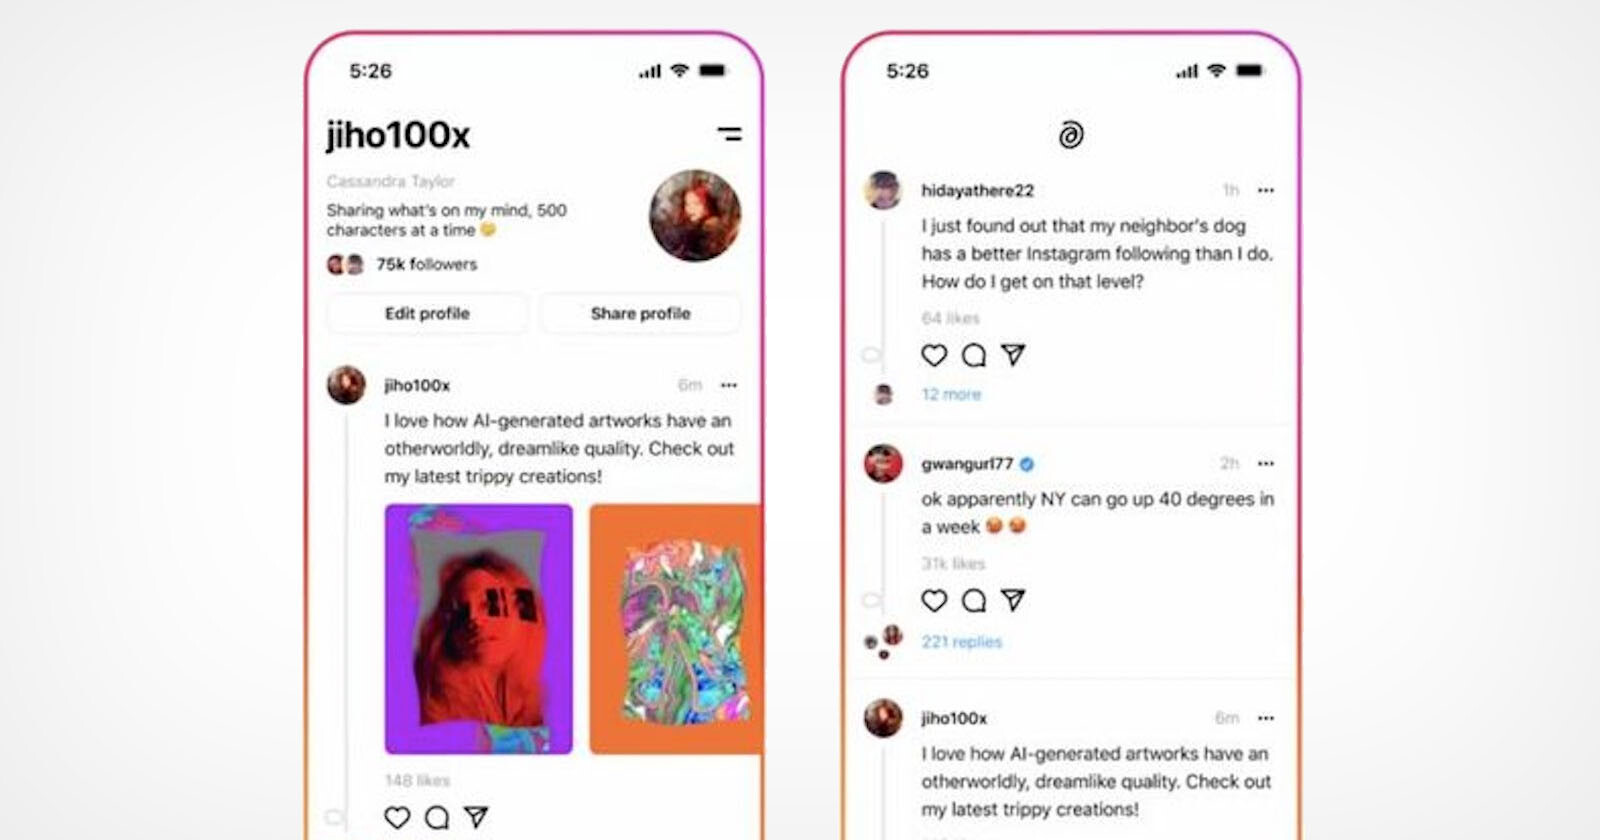  leaked image shows what instagram twitter competitor 